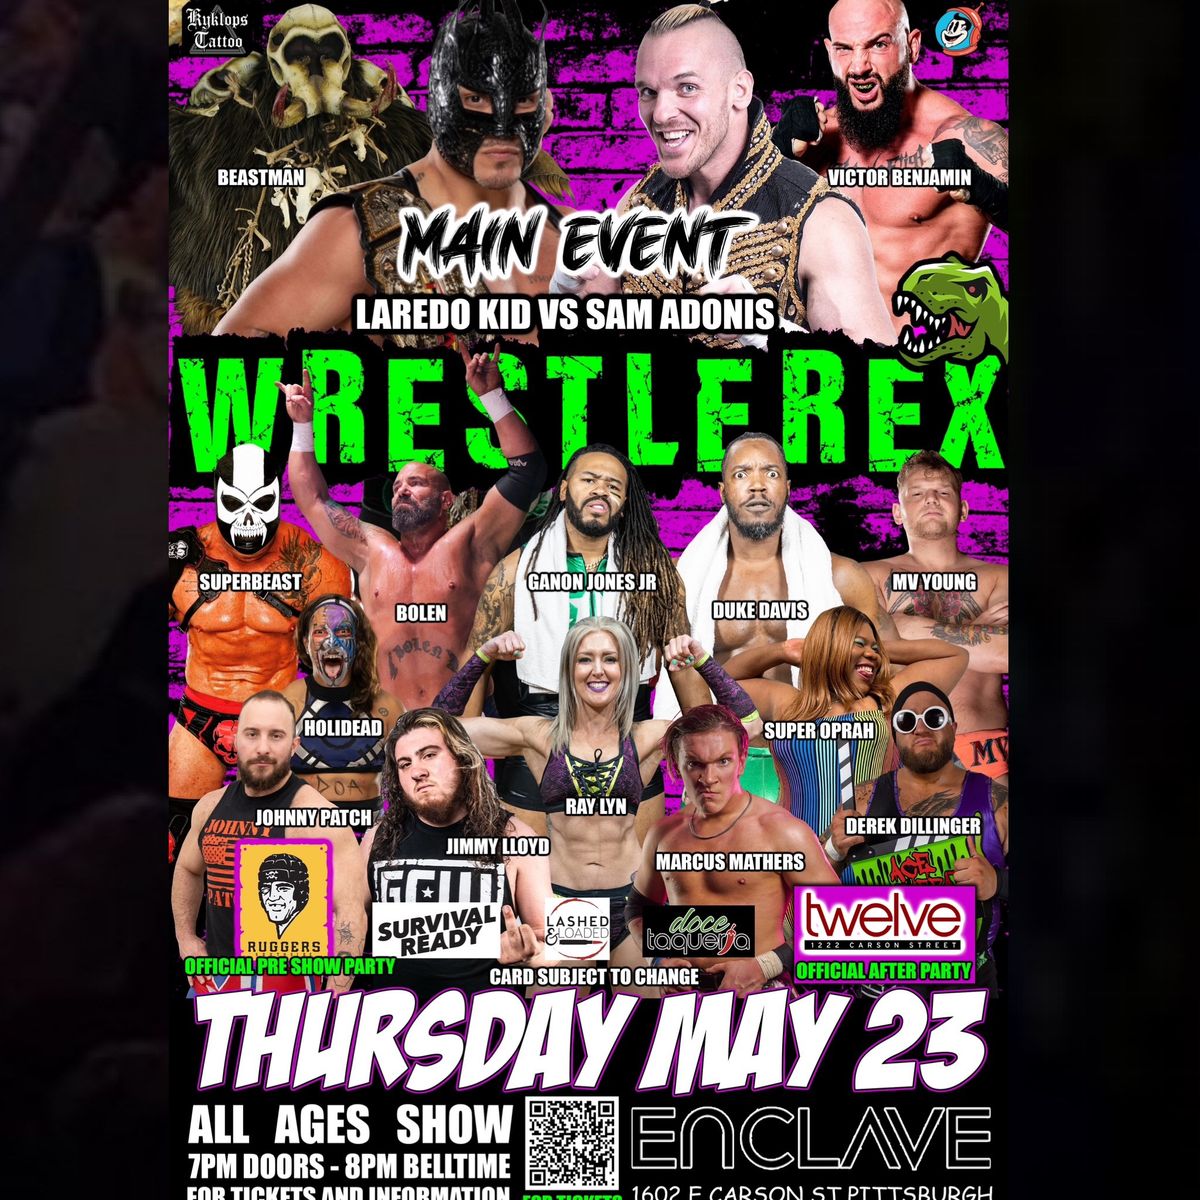 WRESTLEREX Returns to SouthSide Pittsburgh on Thursday May 23rd!!!